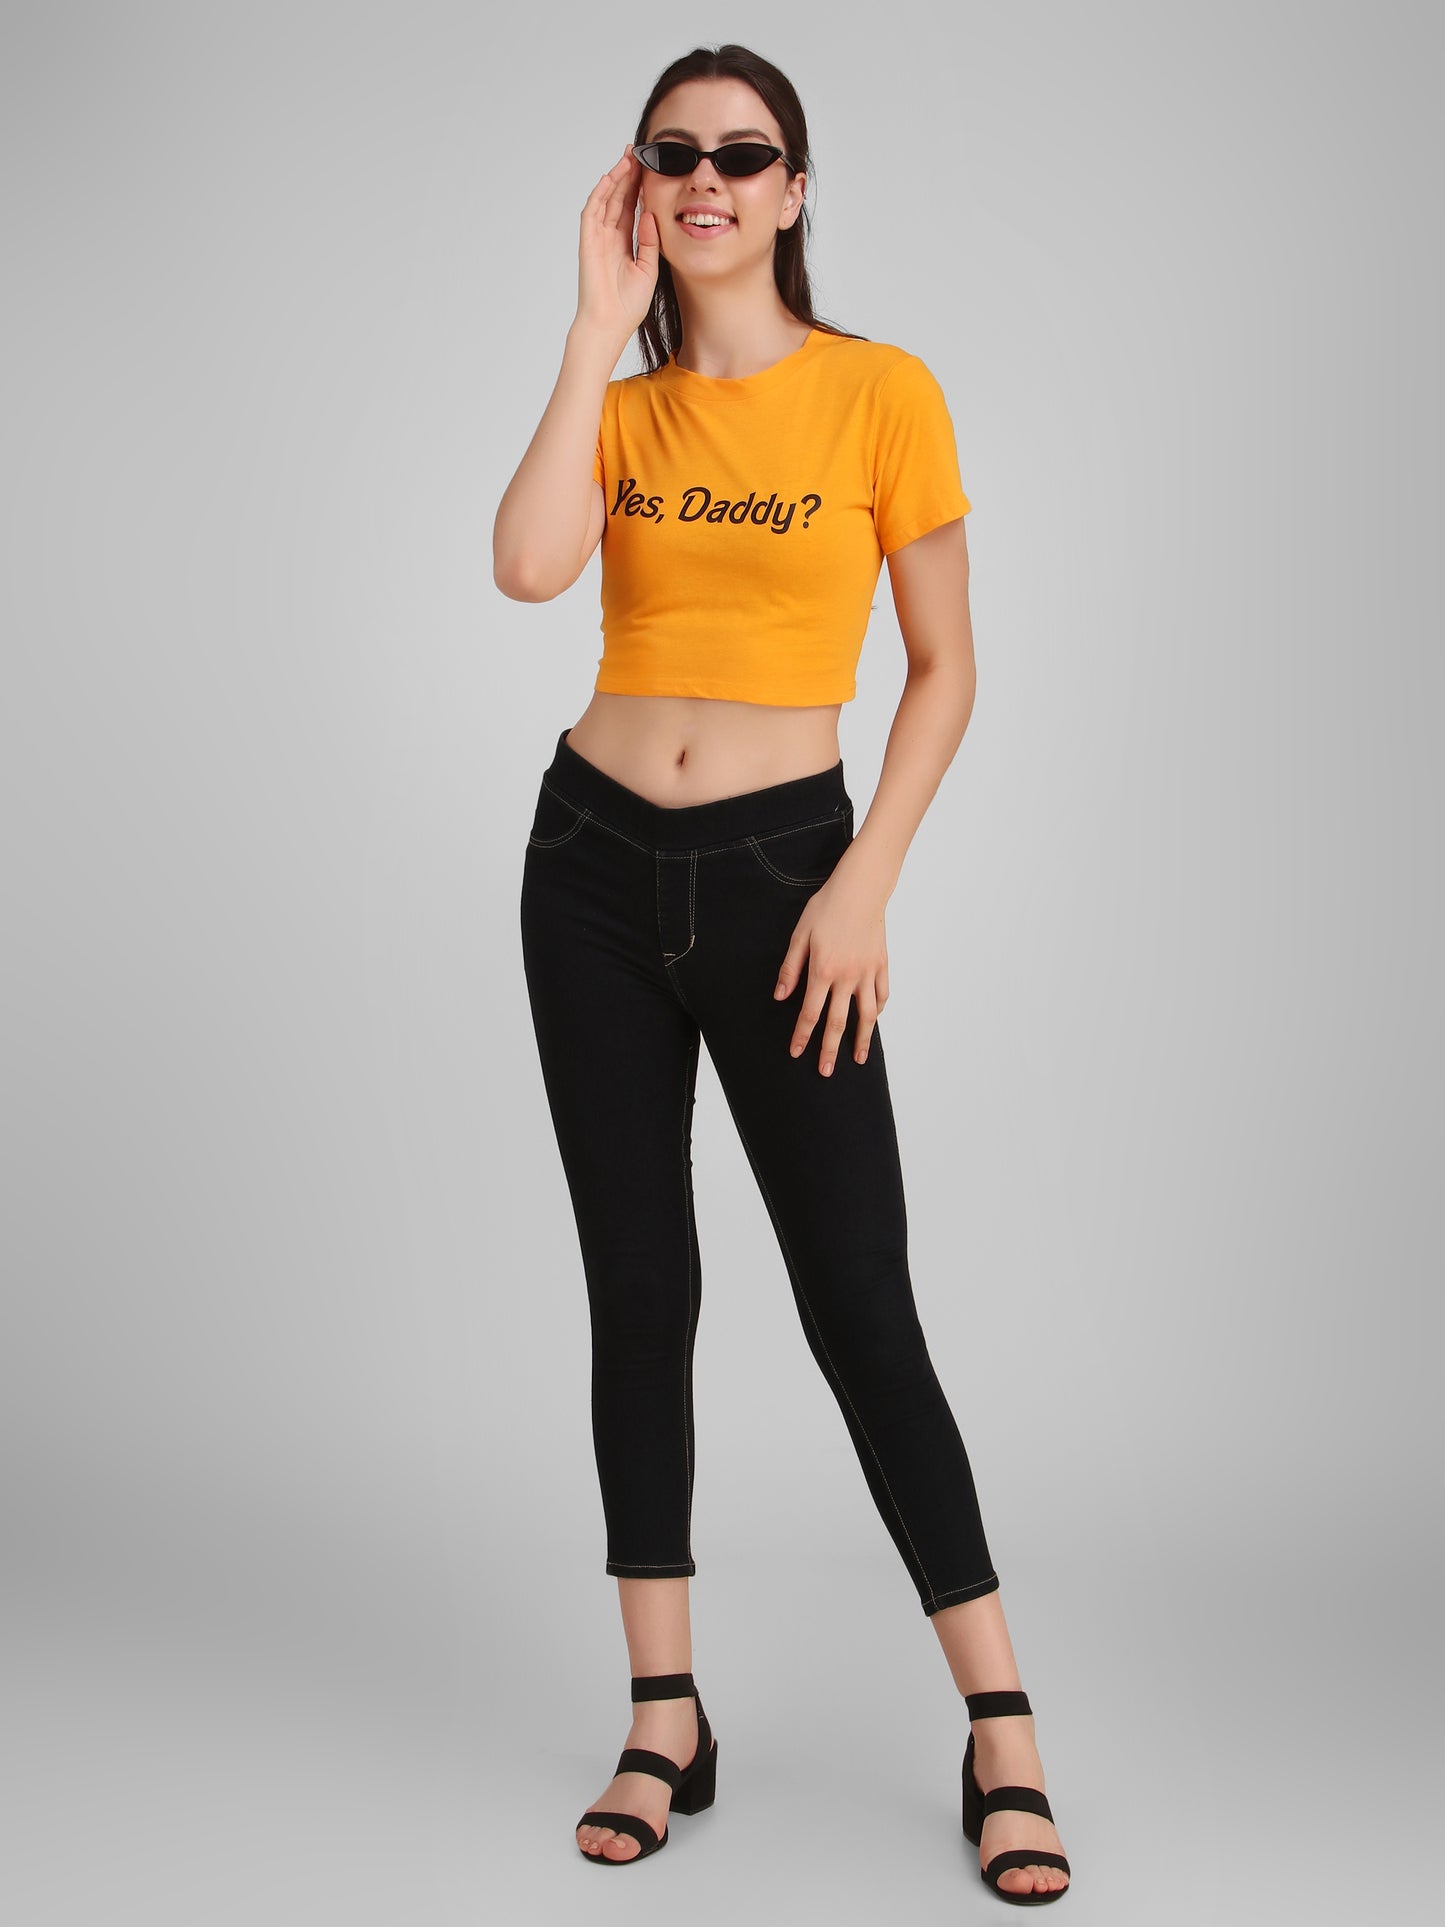 Grey Dog & Mustard Yes Daddy Print Combo(2 Tops) Crop Tops!!